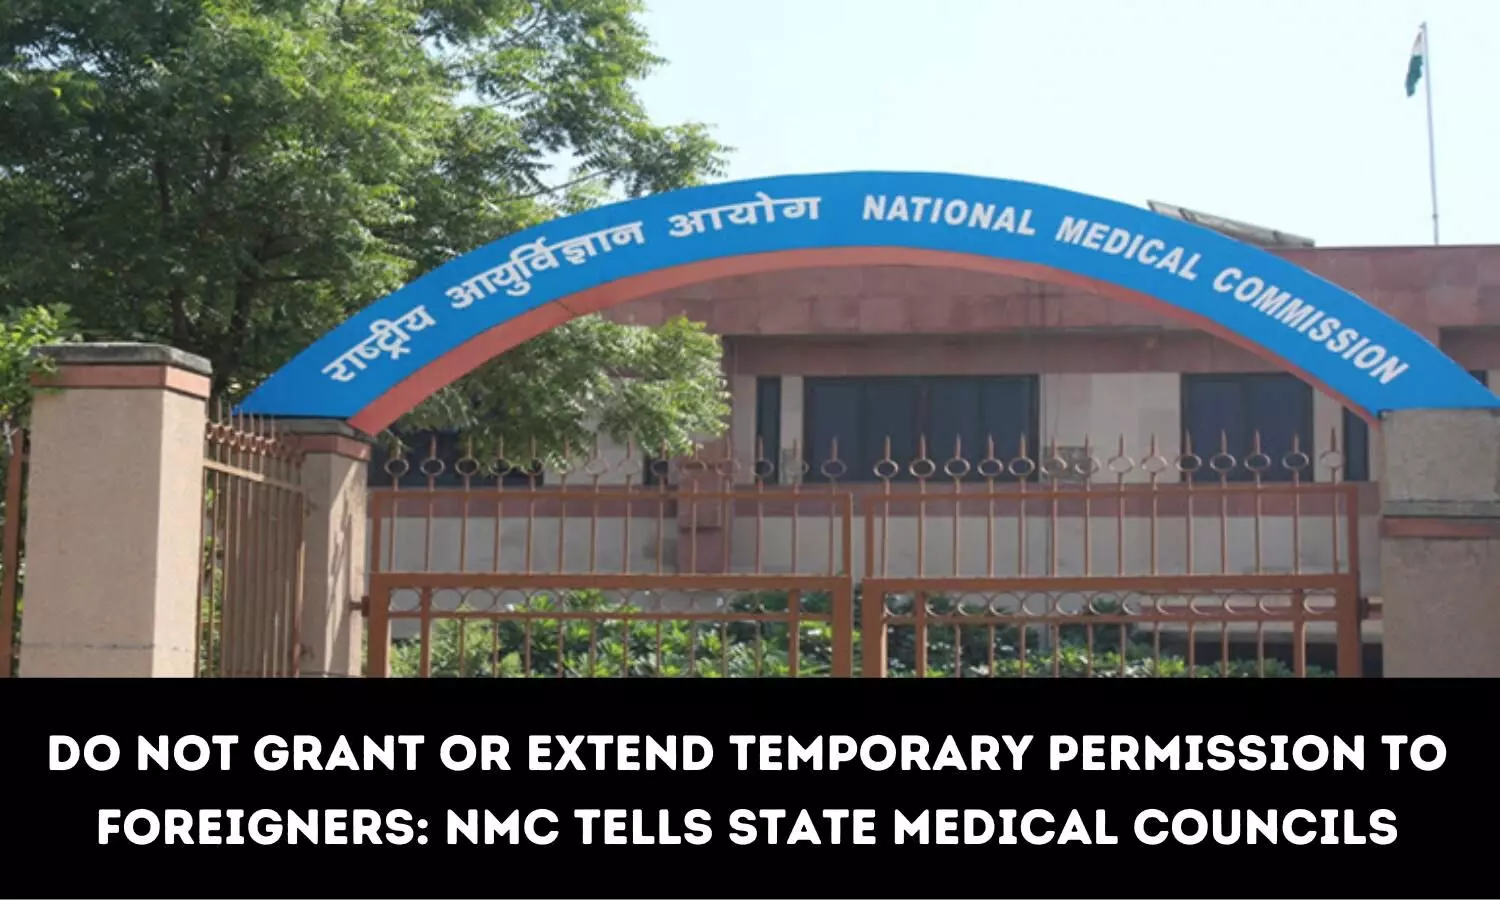 State Medical Councils must neither give temporary permission to foreigners nor extend temporary permission time period: NMC